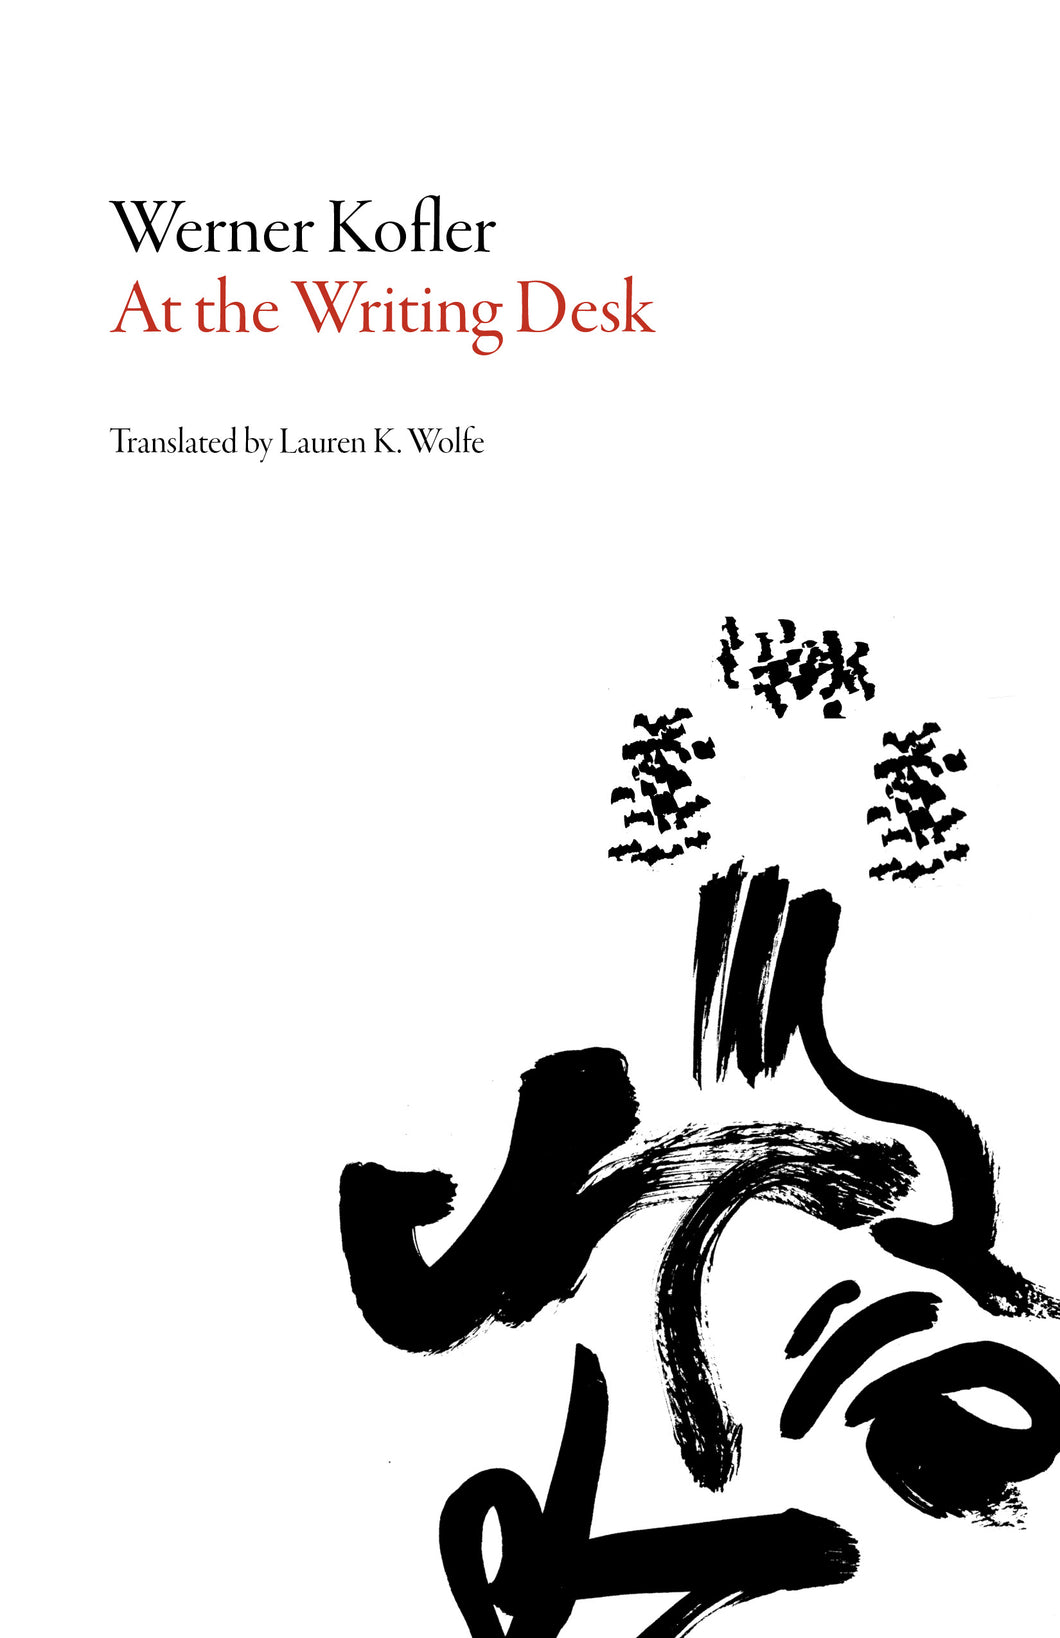 At the Writing Desk